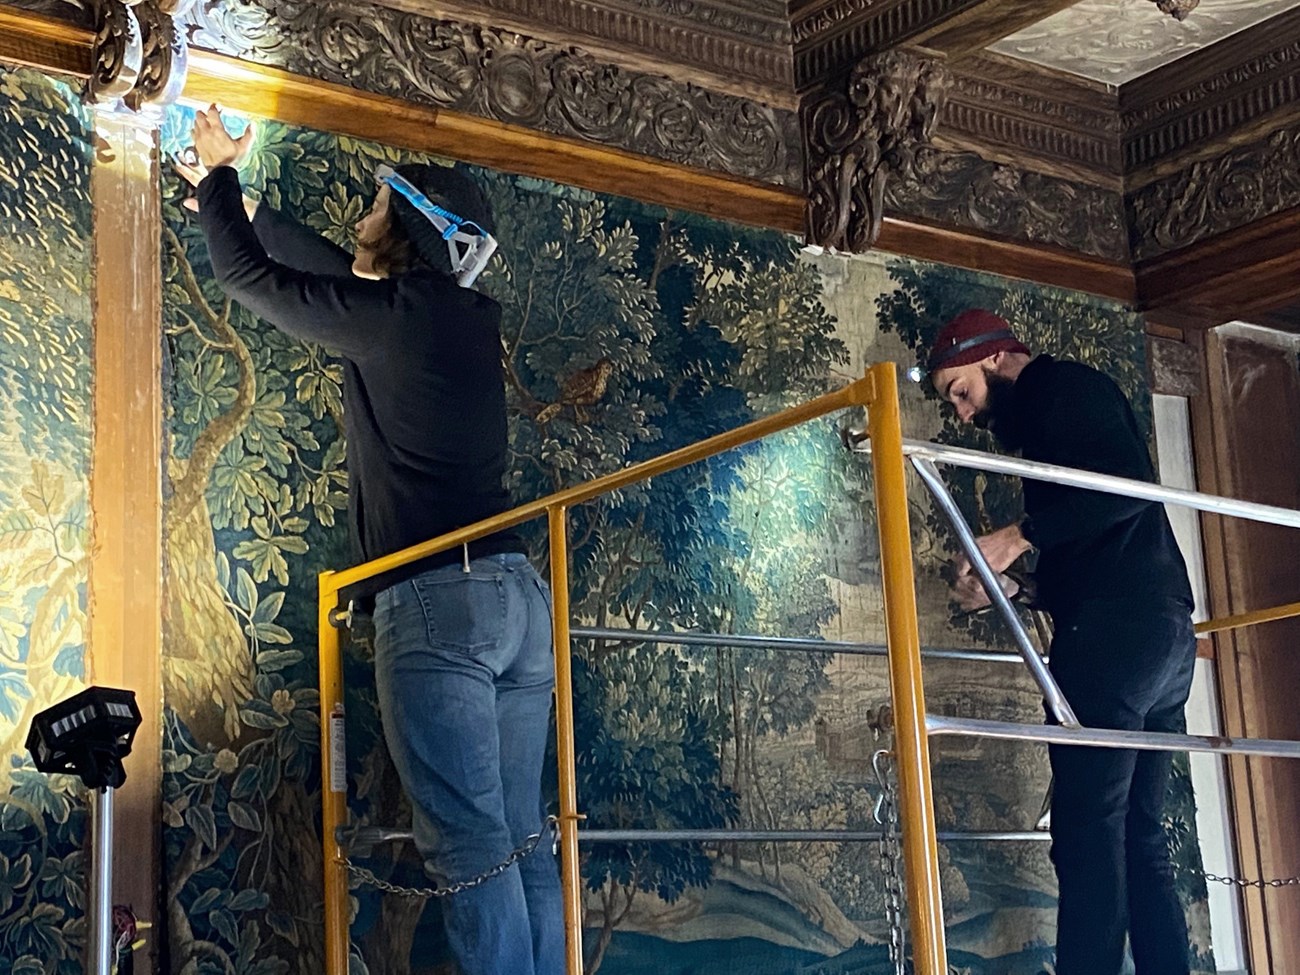 Two conservators on scaffolding carefully remove a tapestry from the wall.